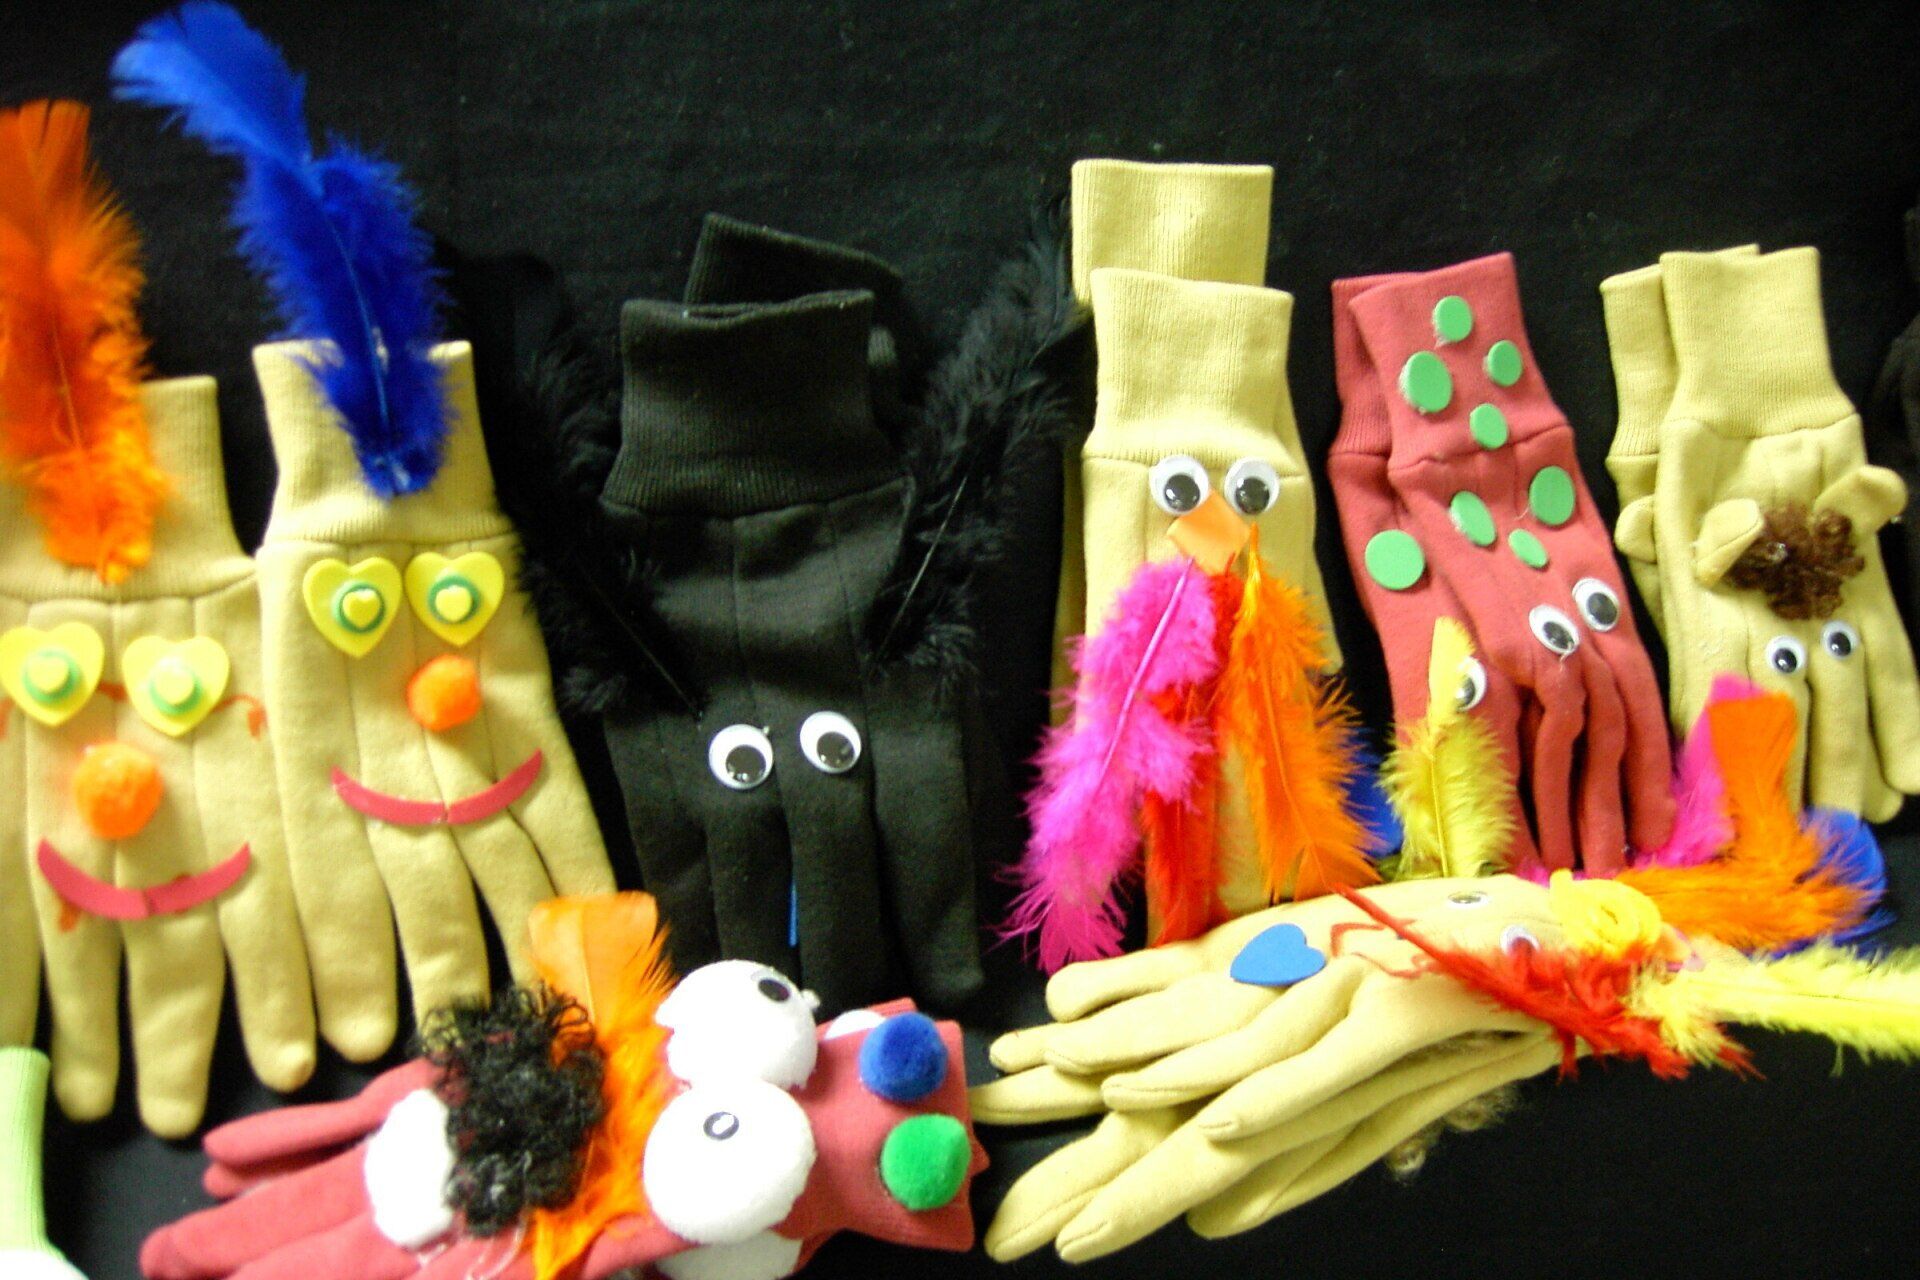 colorful glove puppets created by elementary students at our workshop